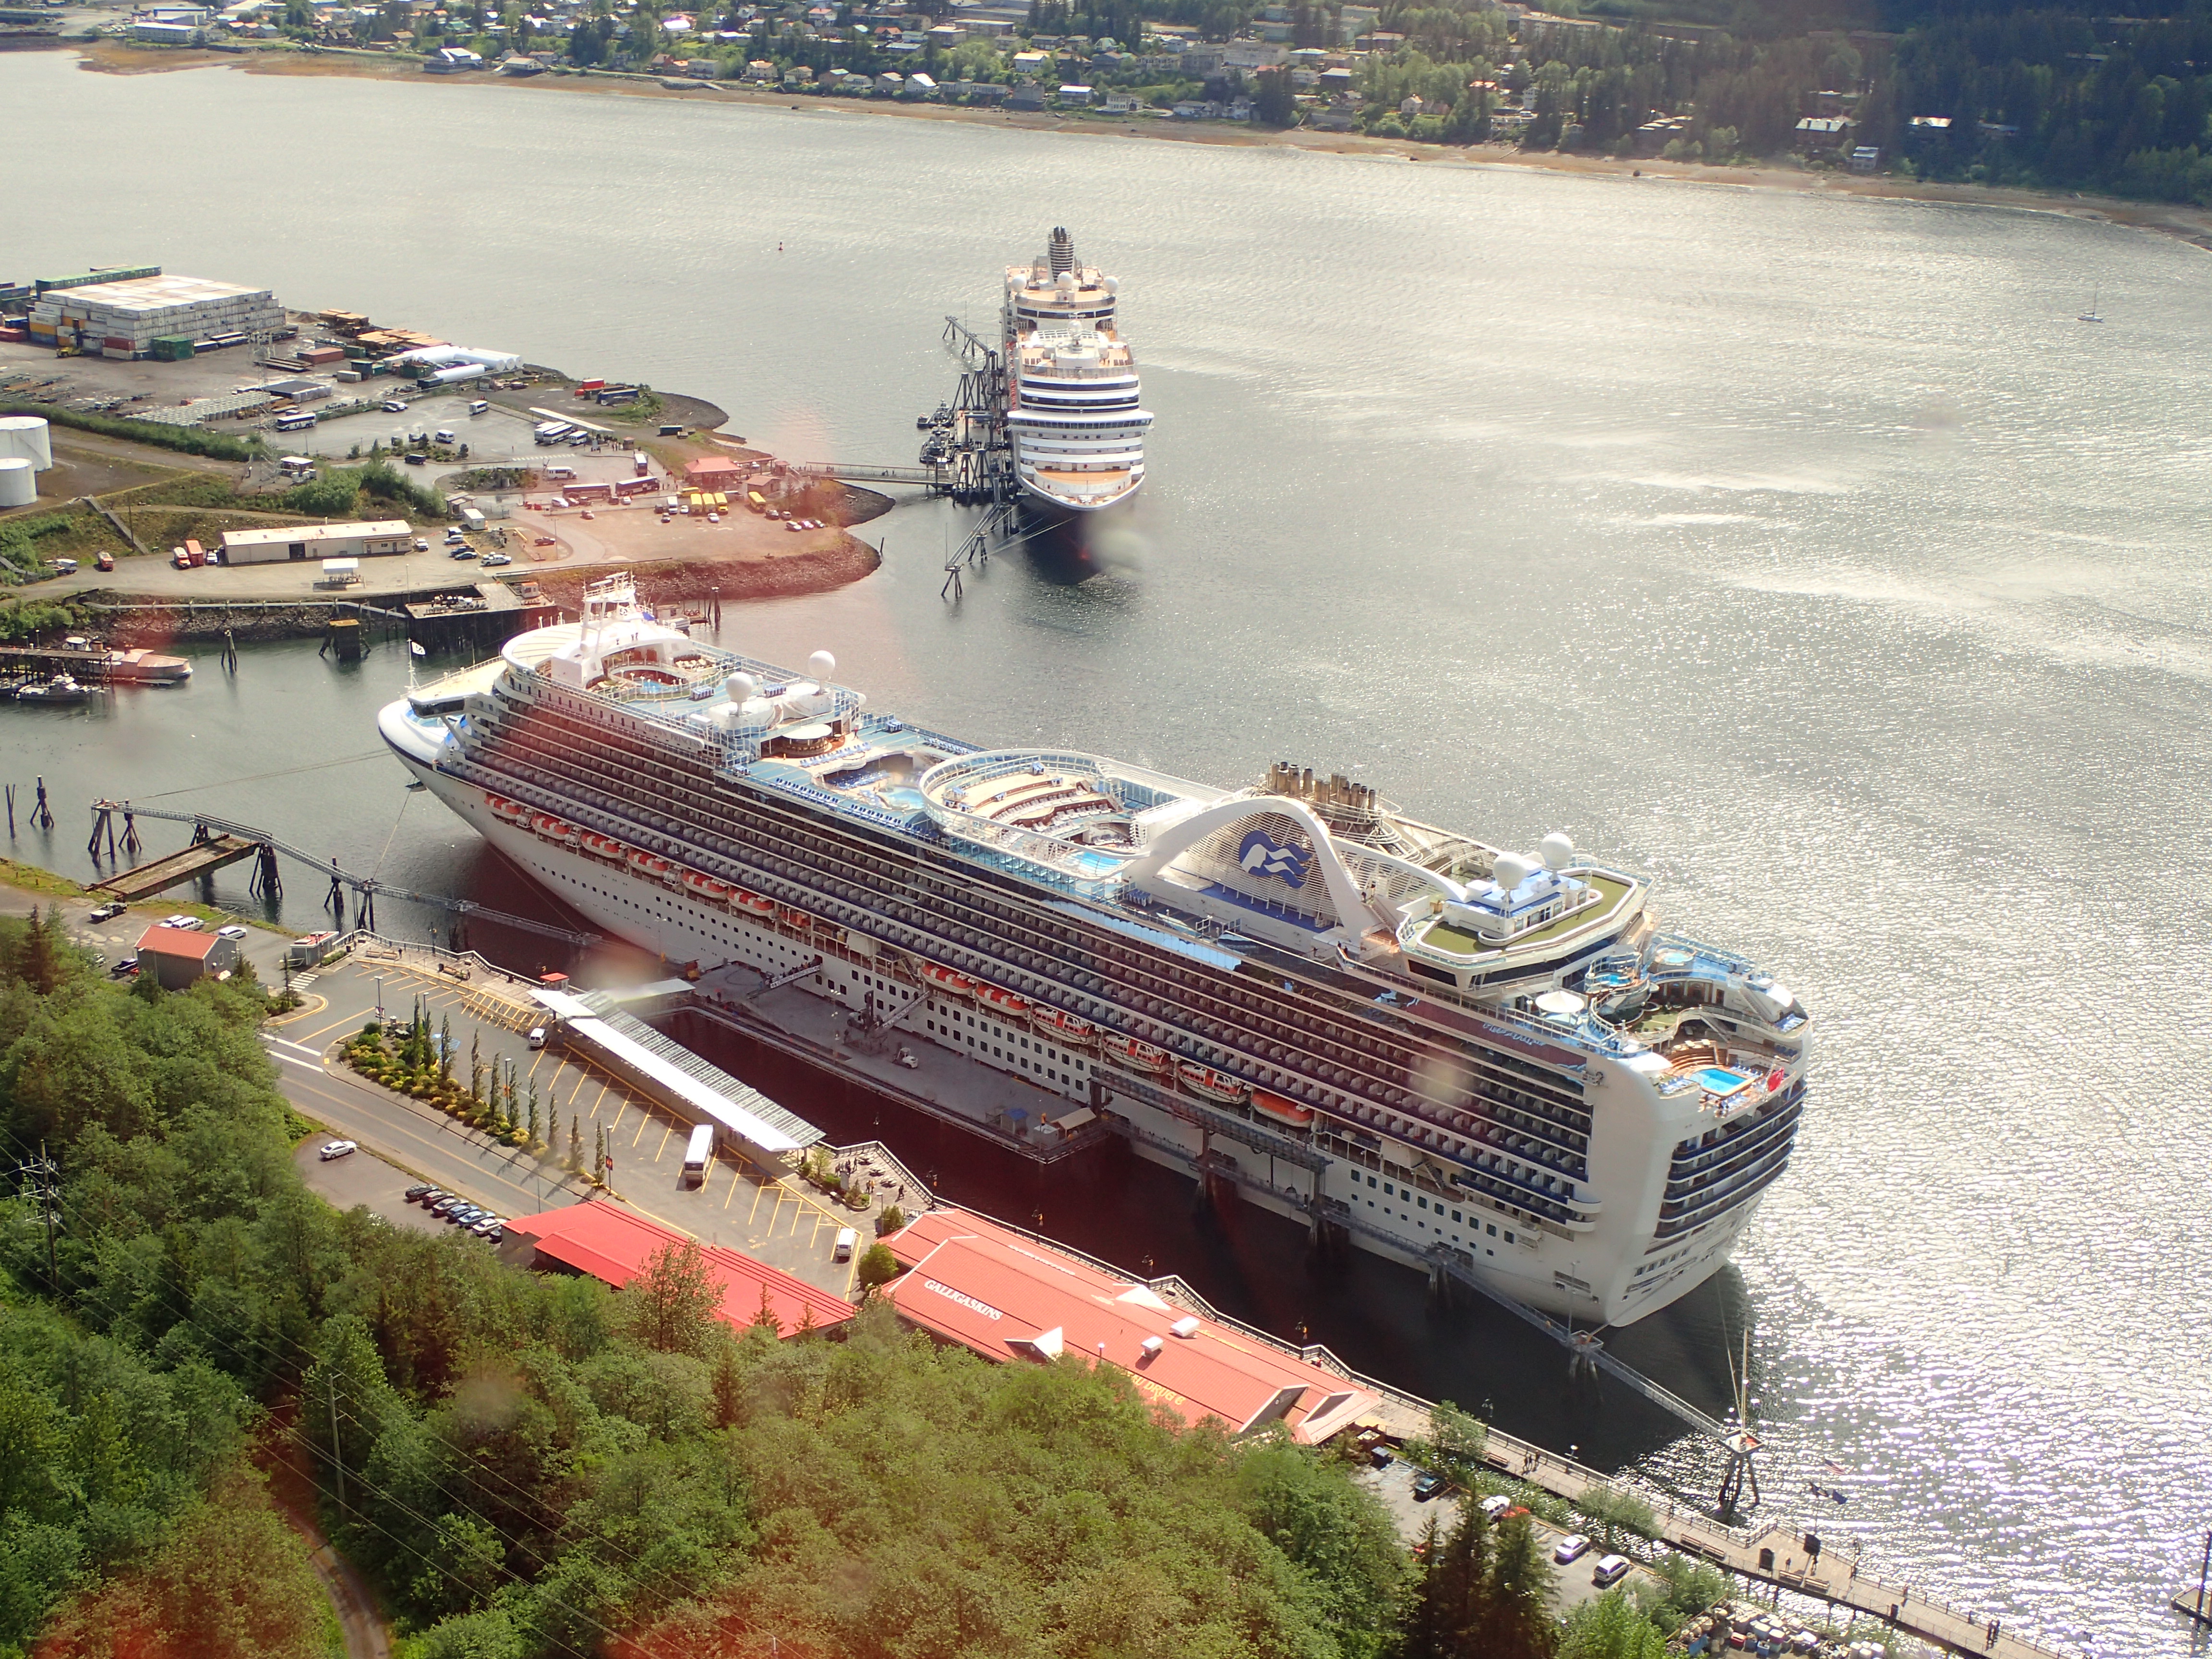 Looking down on our cruise ship from the Mount Roberts tramway in Juneau.